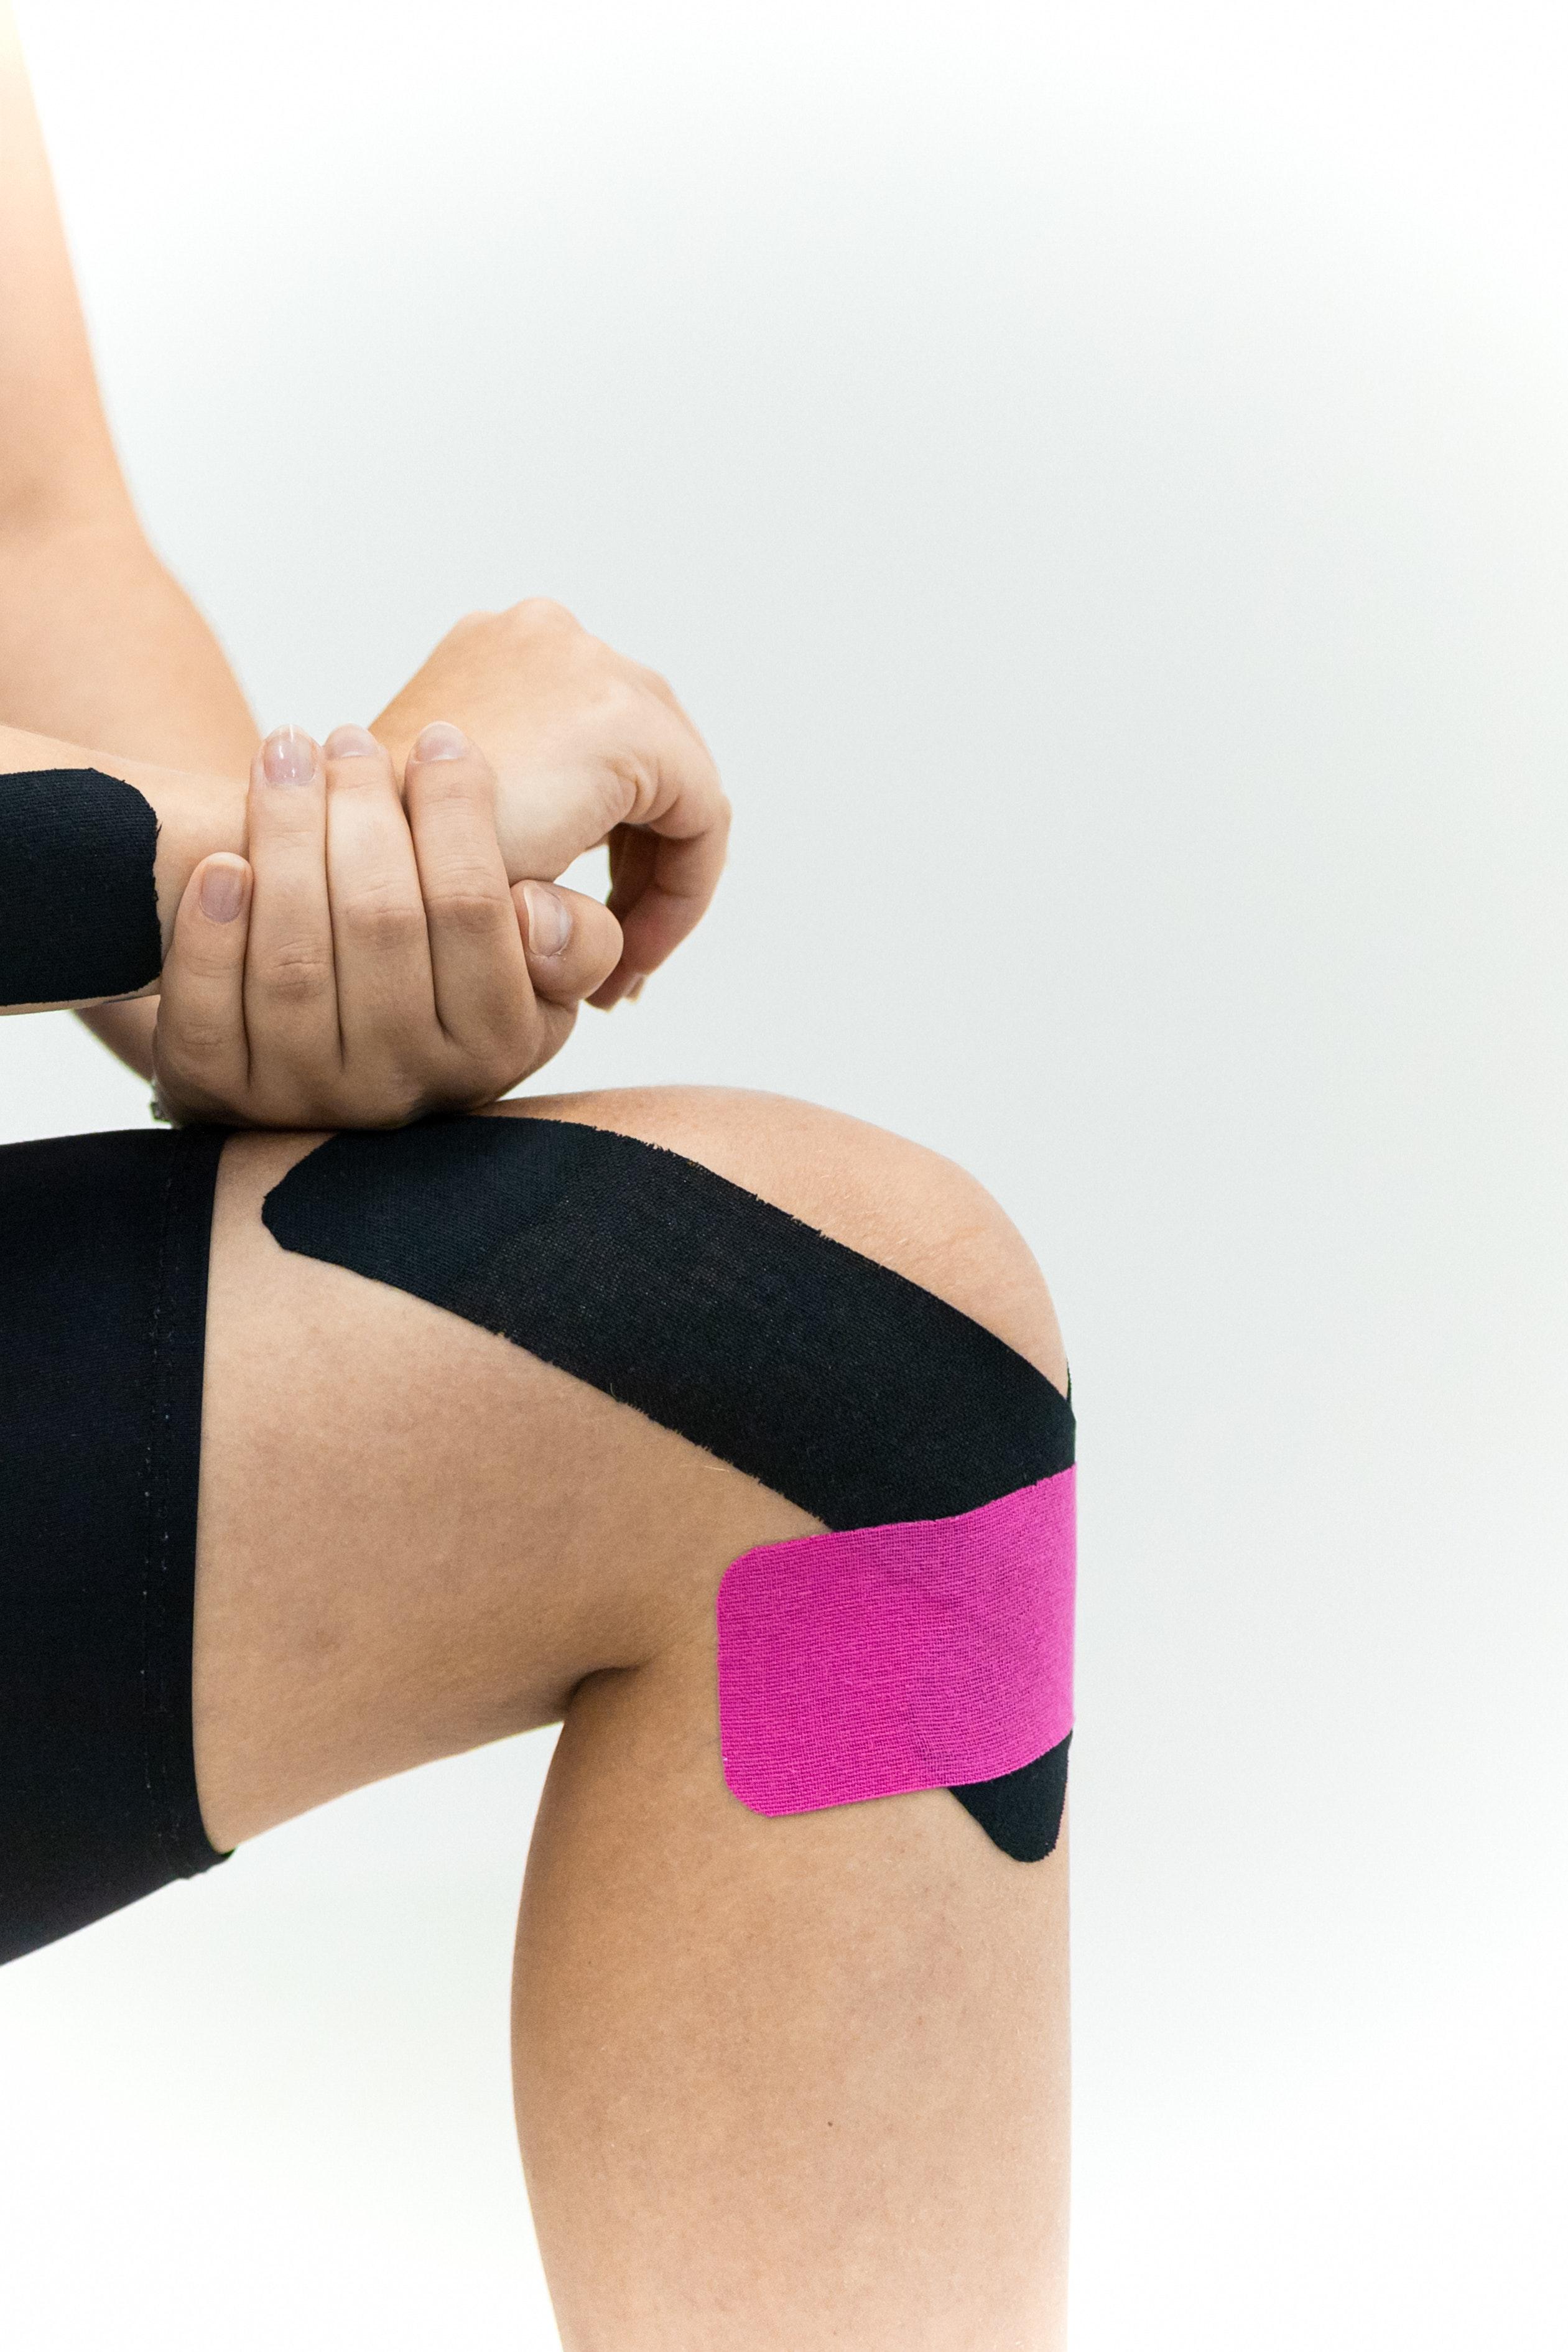 What are the side effects of KT Tape? 